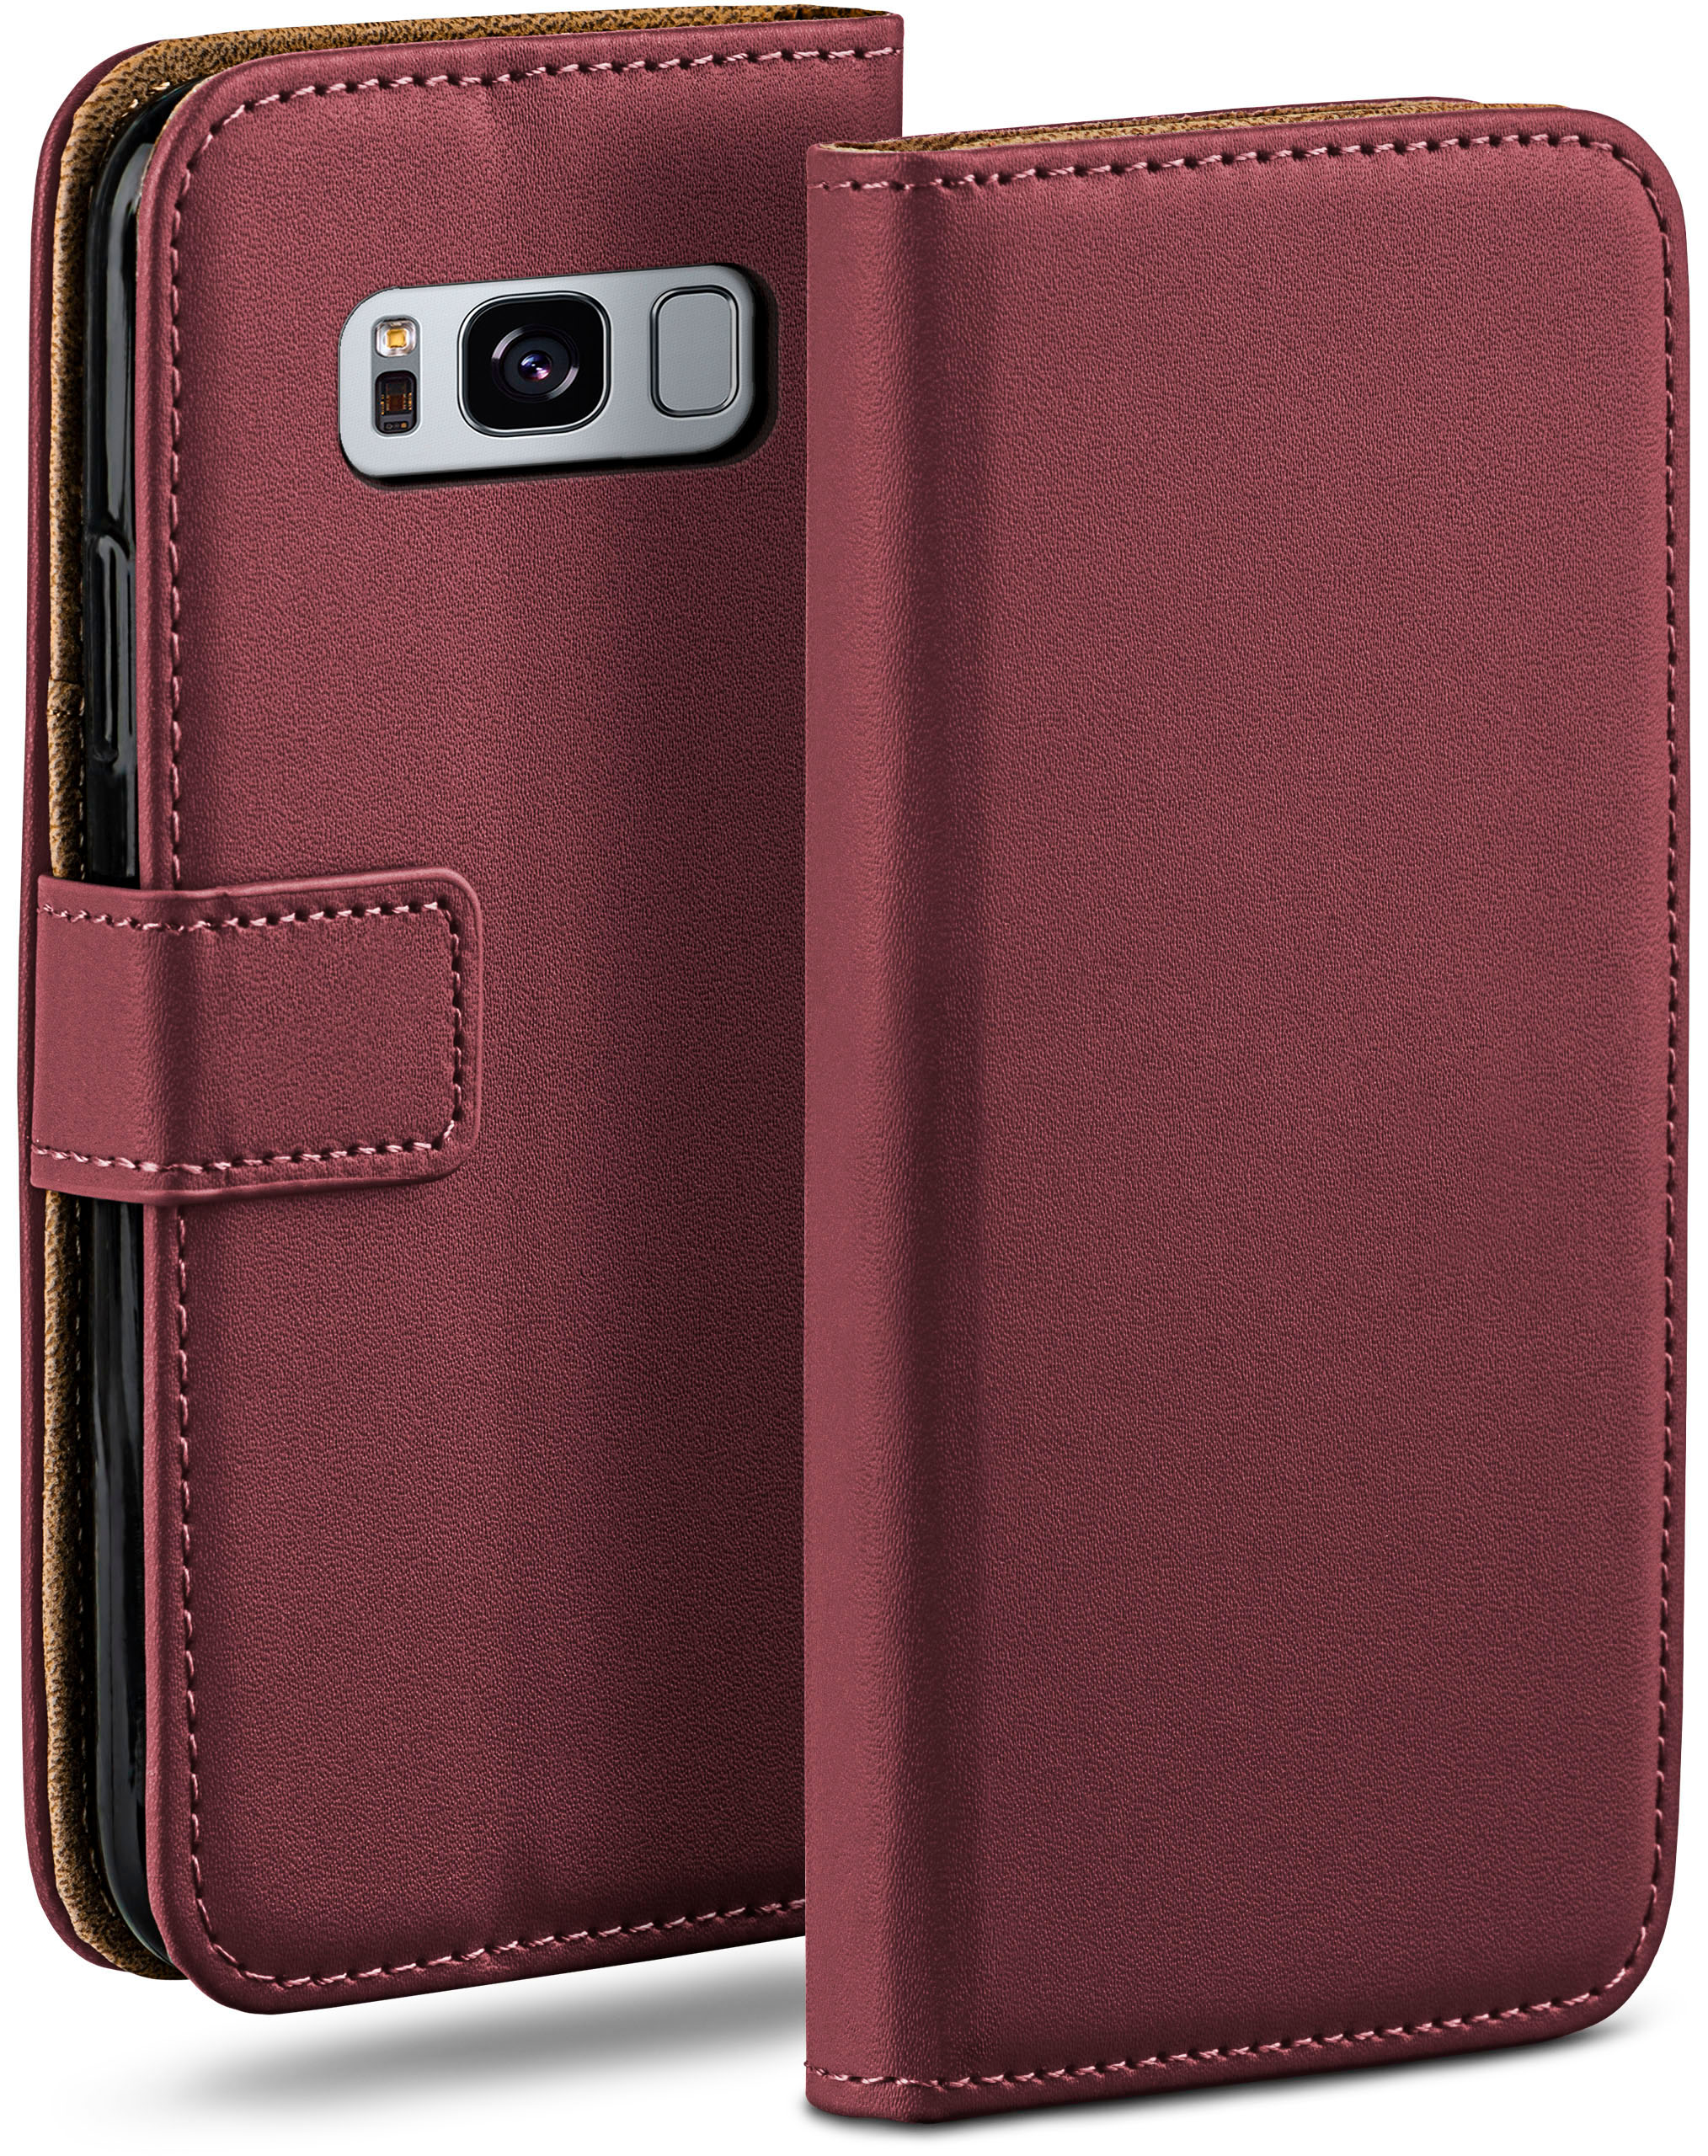 MOEX Book Galaxy Case, Maroon-Red S8 Plus, Samsung, Bookcover